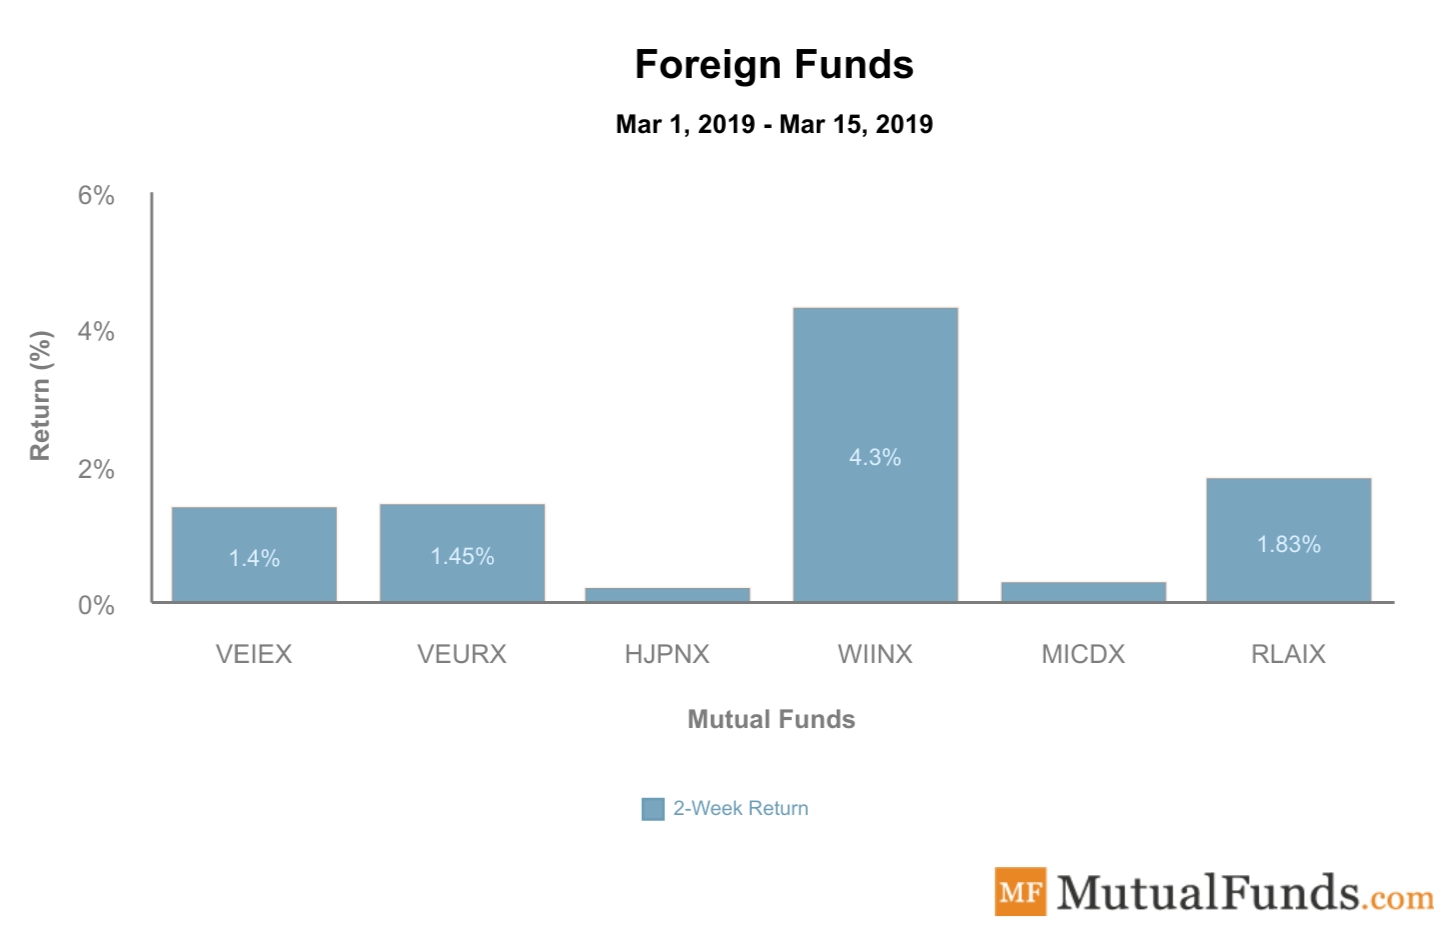 Foreign Funds Performance